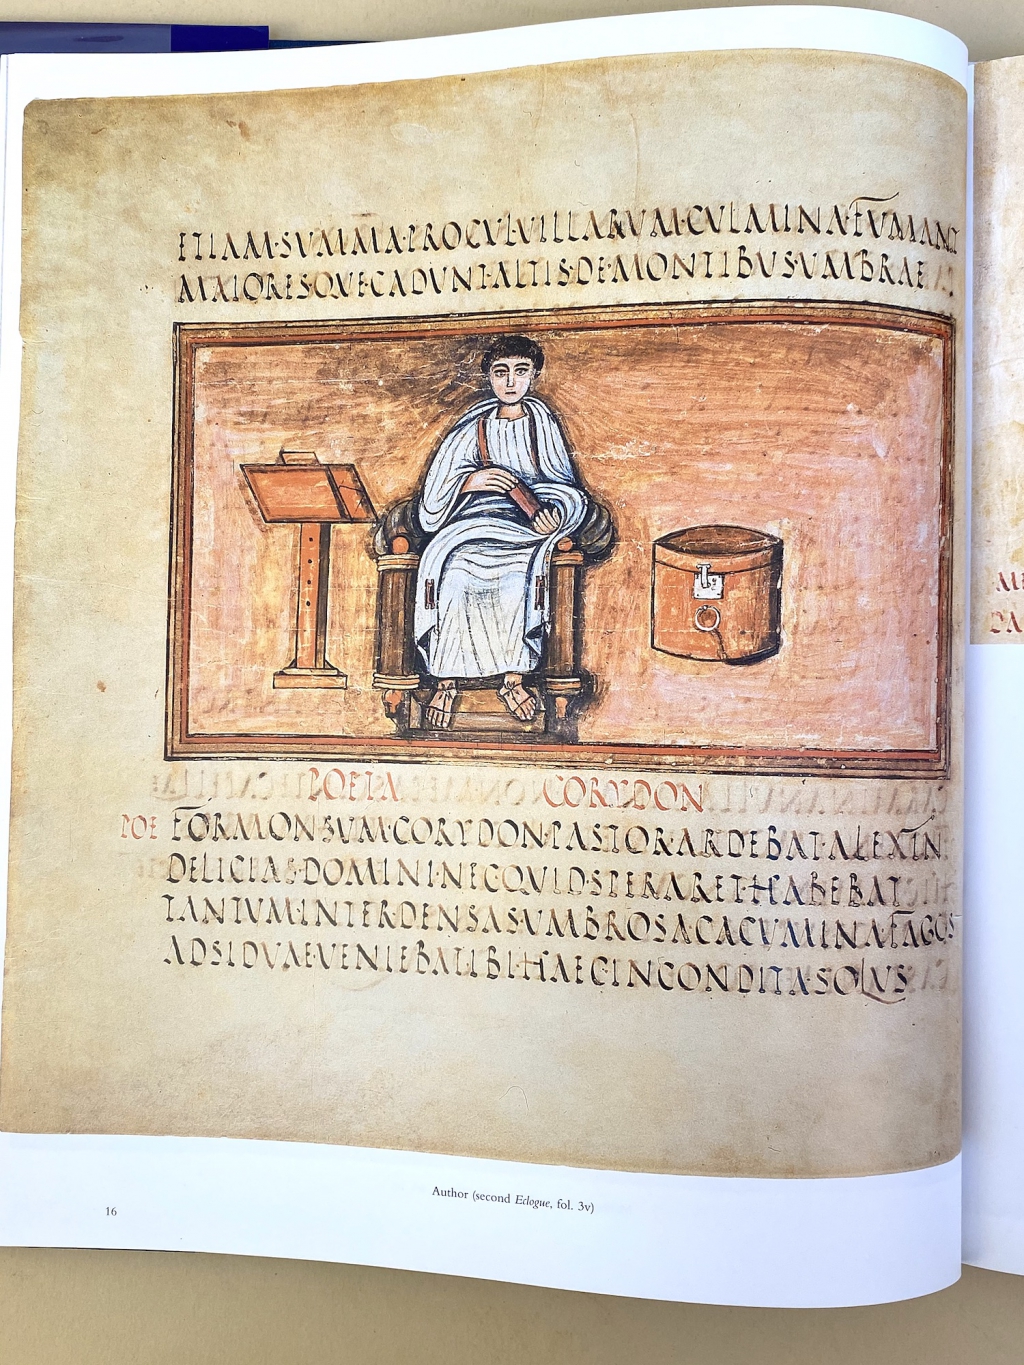 Portrait of Vergil holding a papyrus roll, to the left of a locked scrinium or case for holding papyrus rolls.